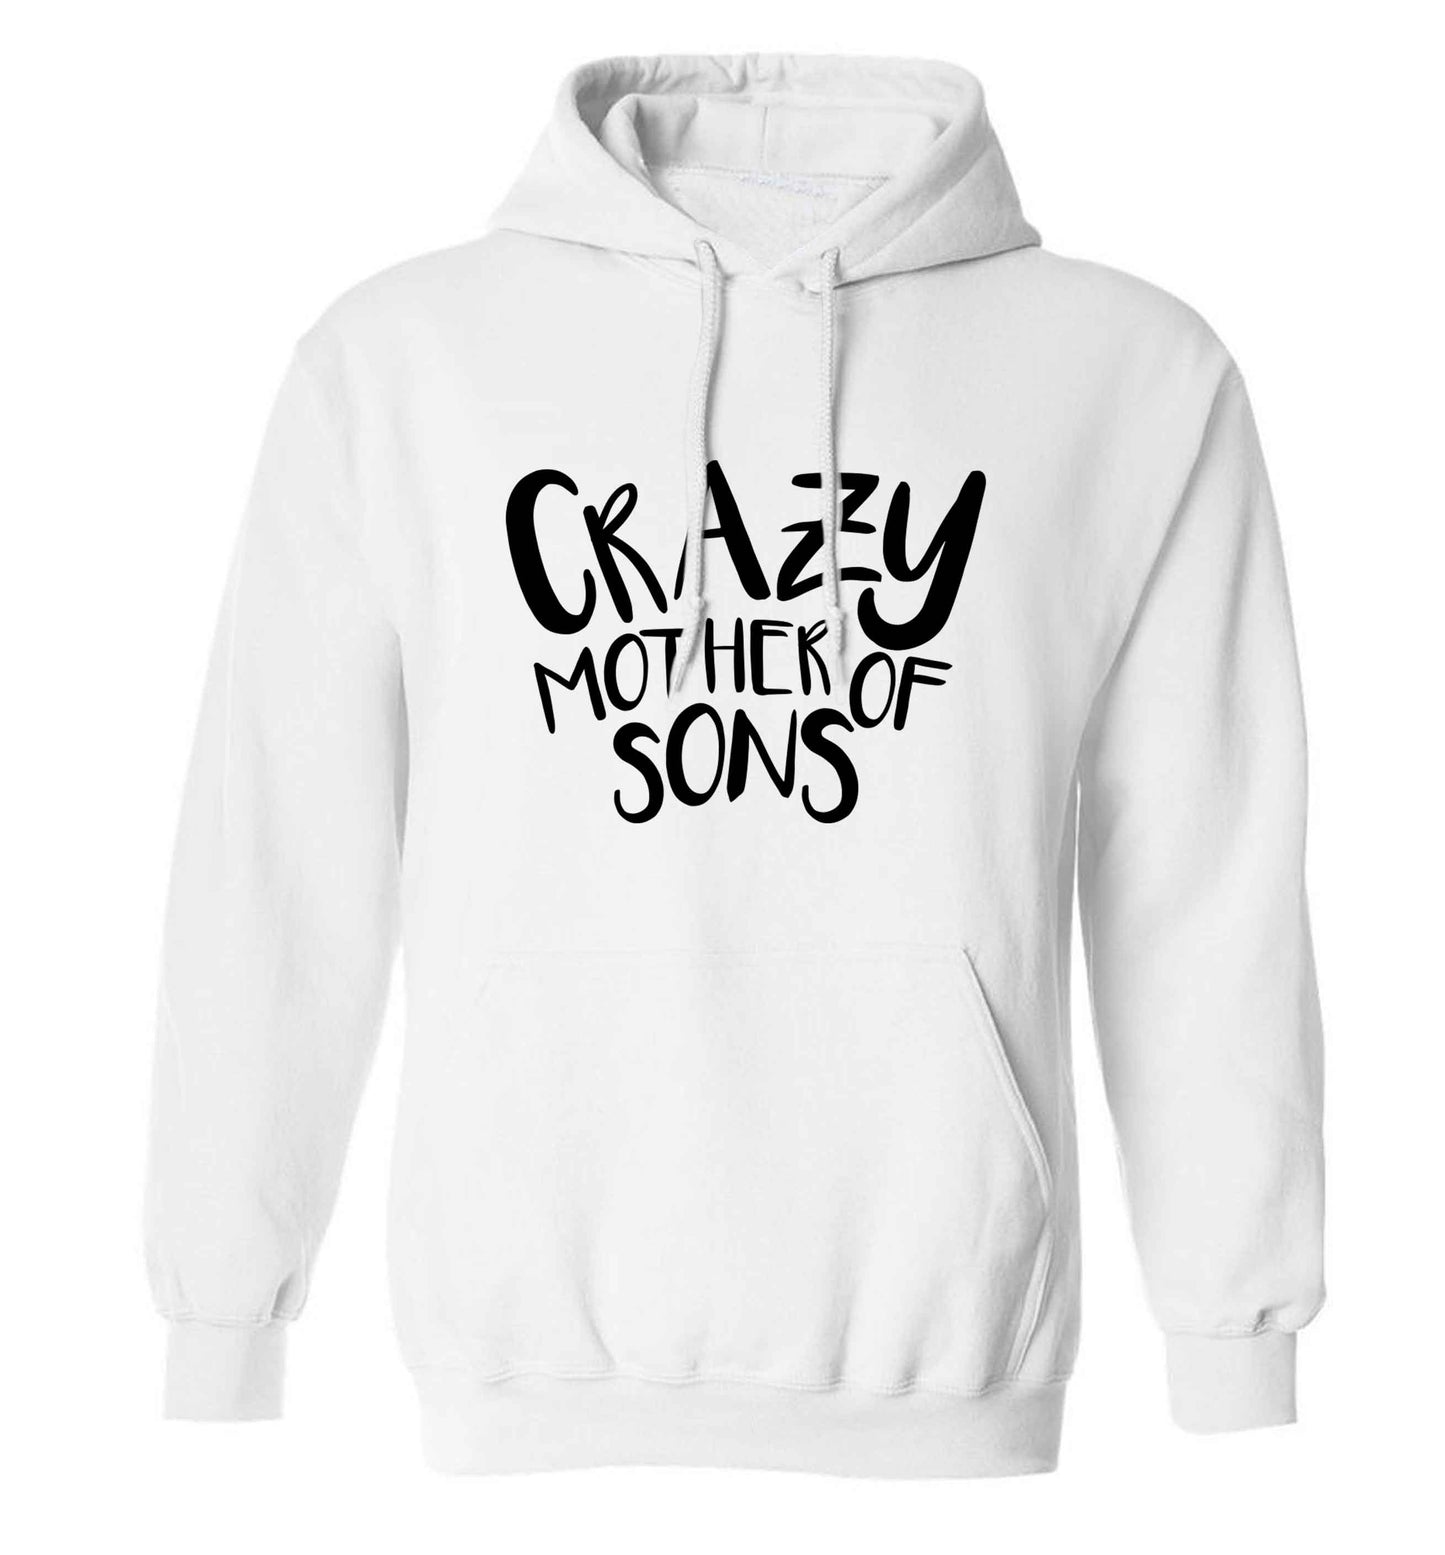 Crazy mother of sons adults unisex white hoodie 2XL